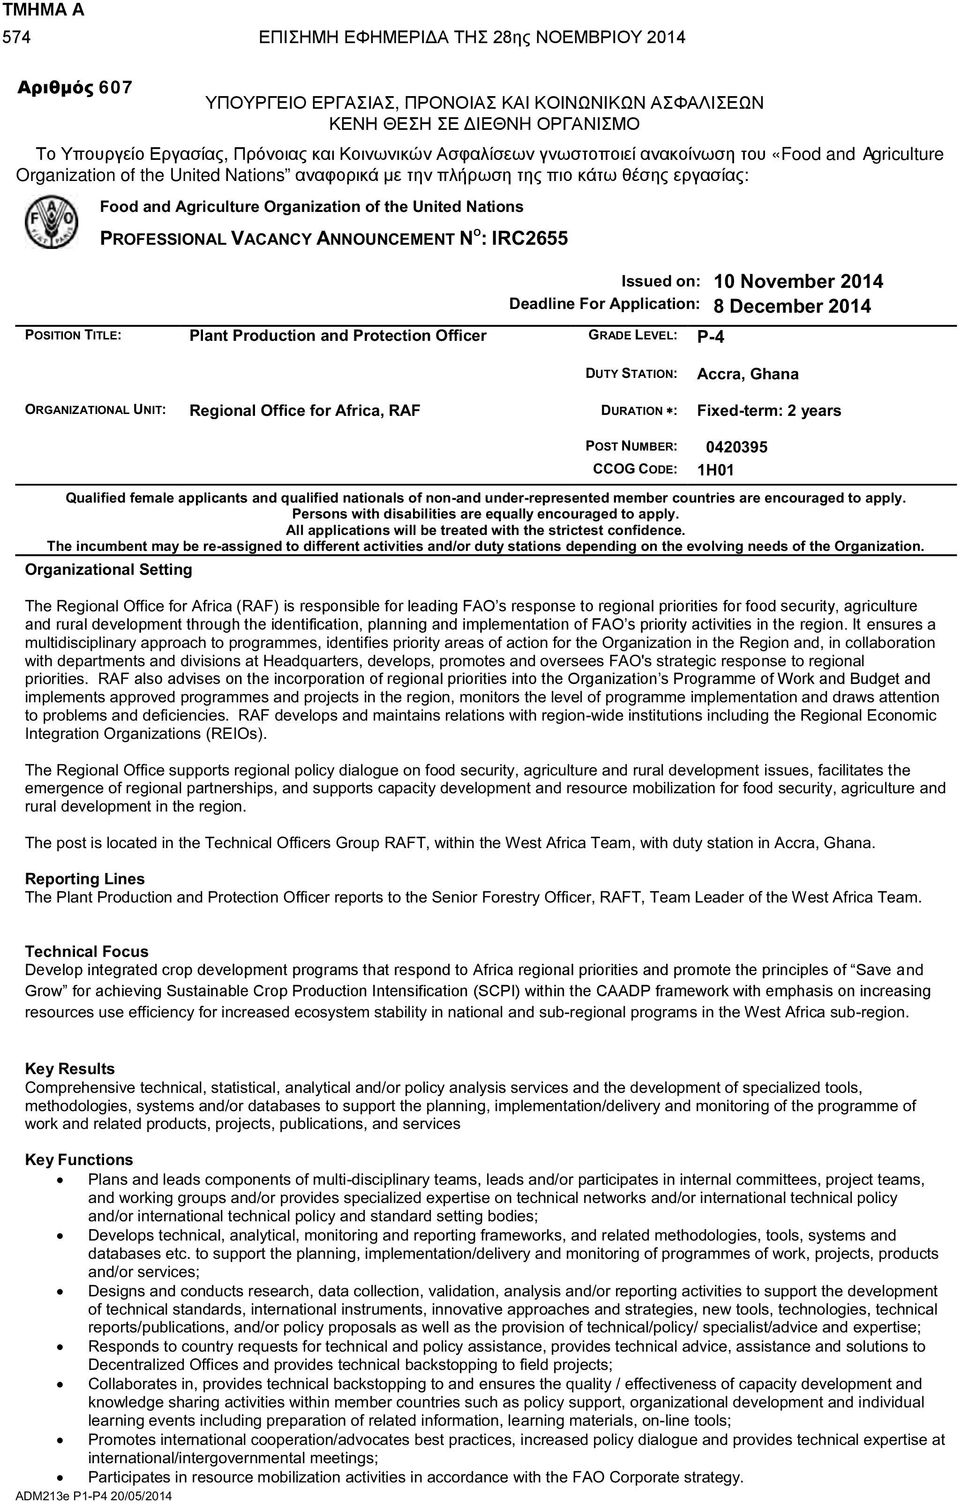 Nations PROFESSIONAL VACANCY ANNOUNCEMENT N O : IRC2655 Issued on: 10 November 2014 Deadline For Application: 8 December 2014 POSITION TITLE: Plant Production and Protection Officer GRADE LEVEL: P-4